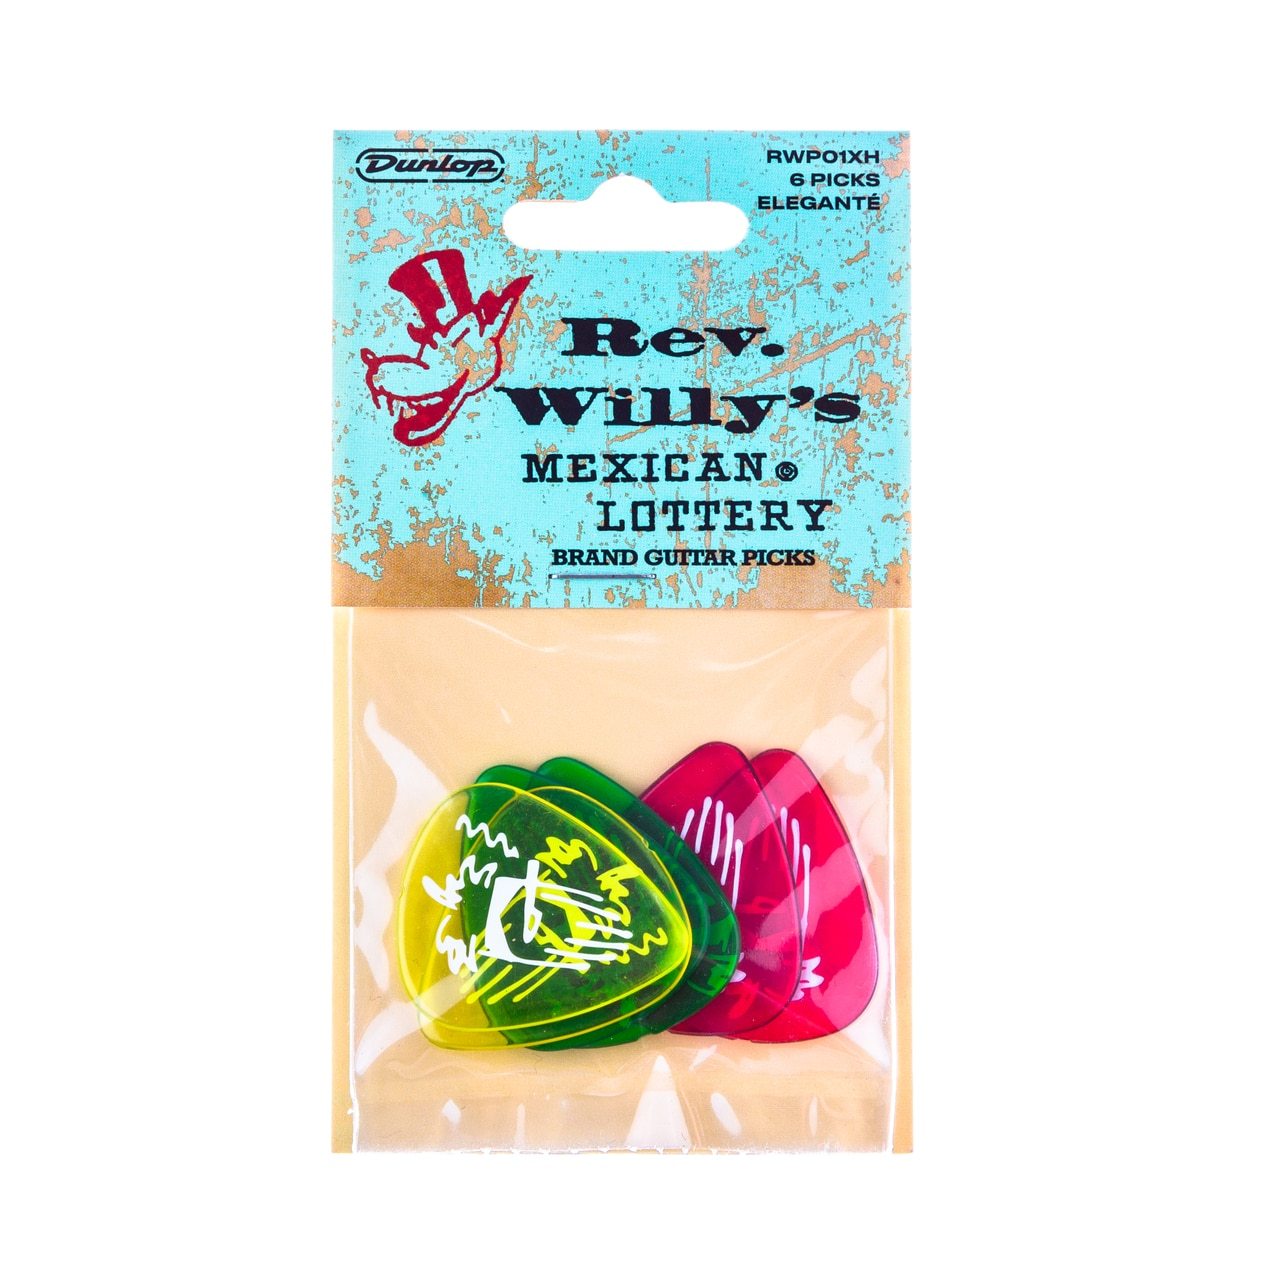 DUNLOP REV. WILLY'S MEXICAN LOTTERY BRAND GUITAR PICKS 6 PACK | RWP01XH